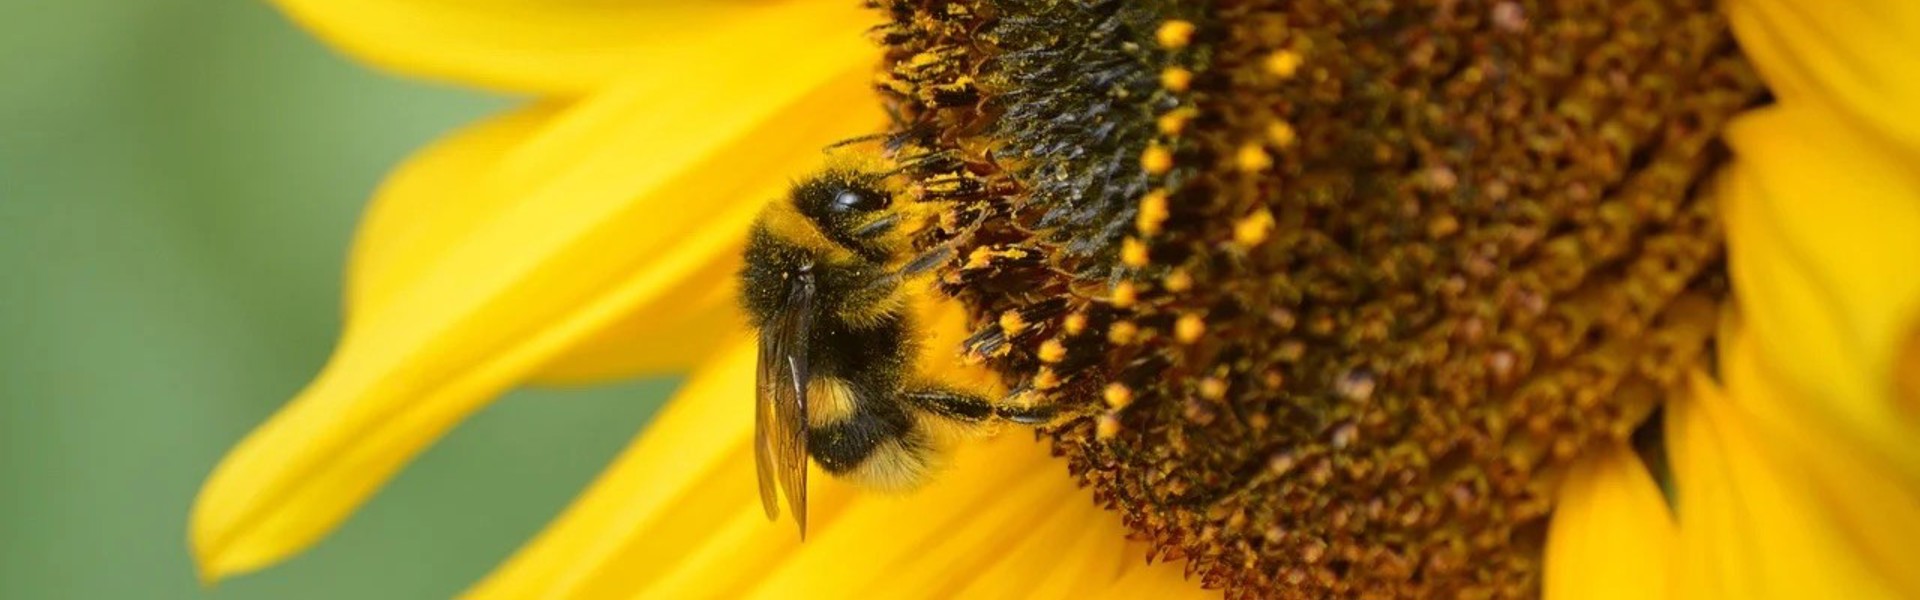 a close up of a bumblebee pollinating a sunflower